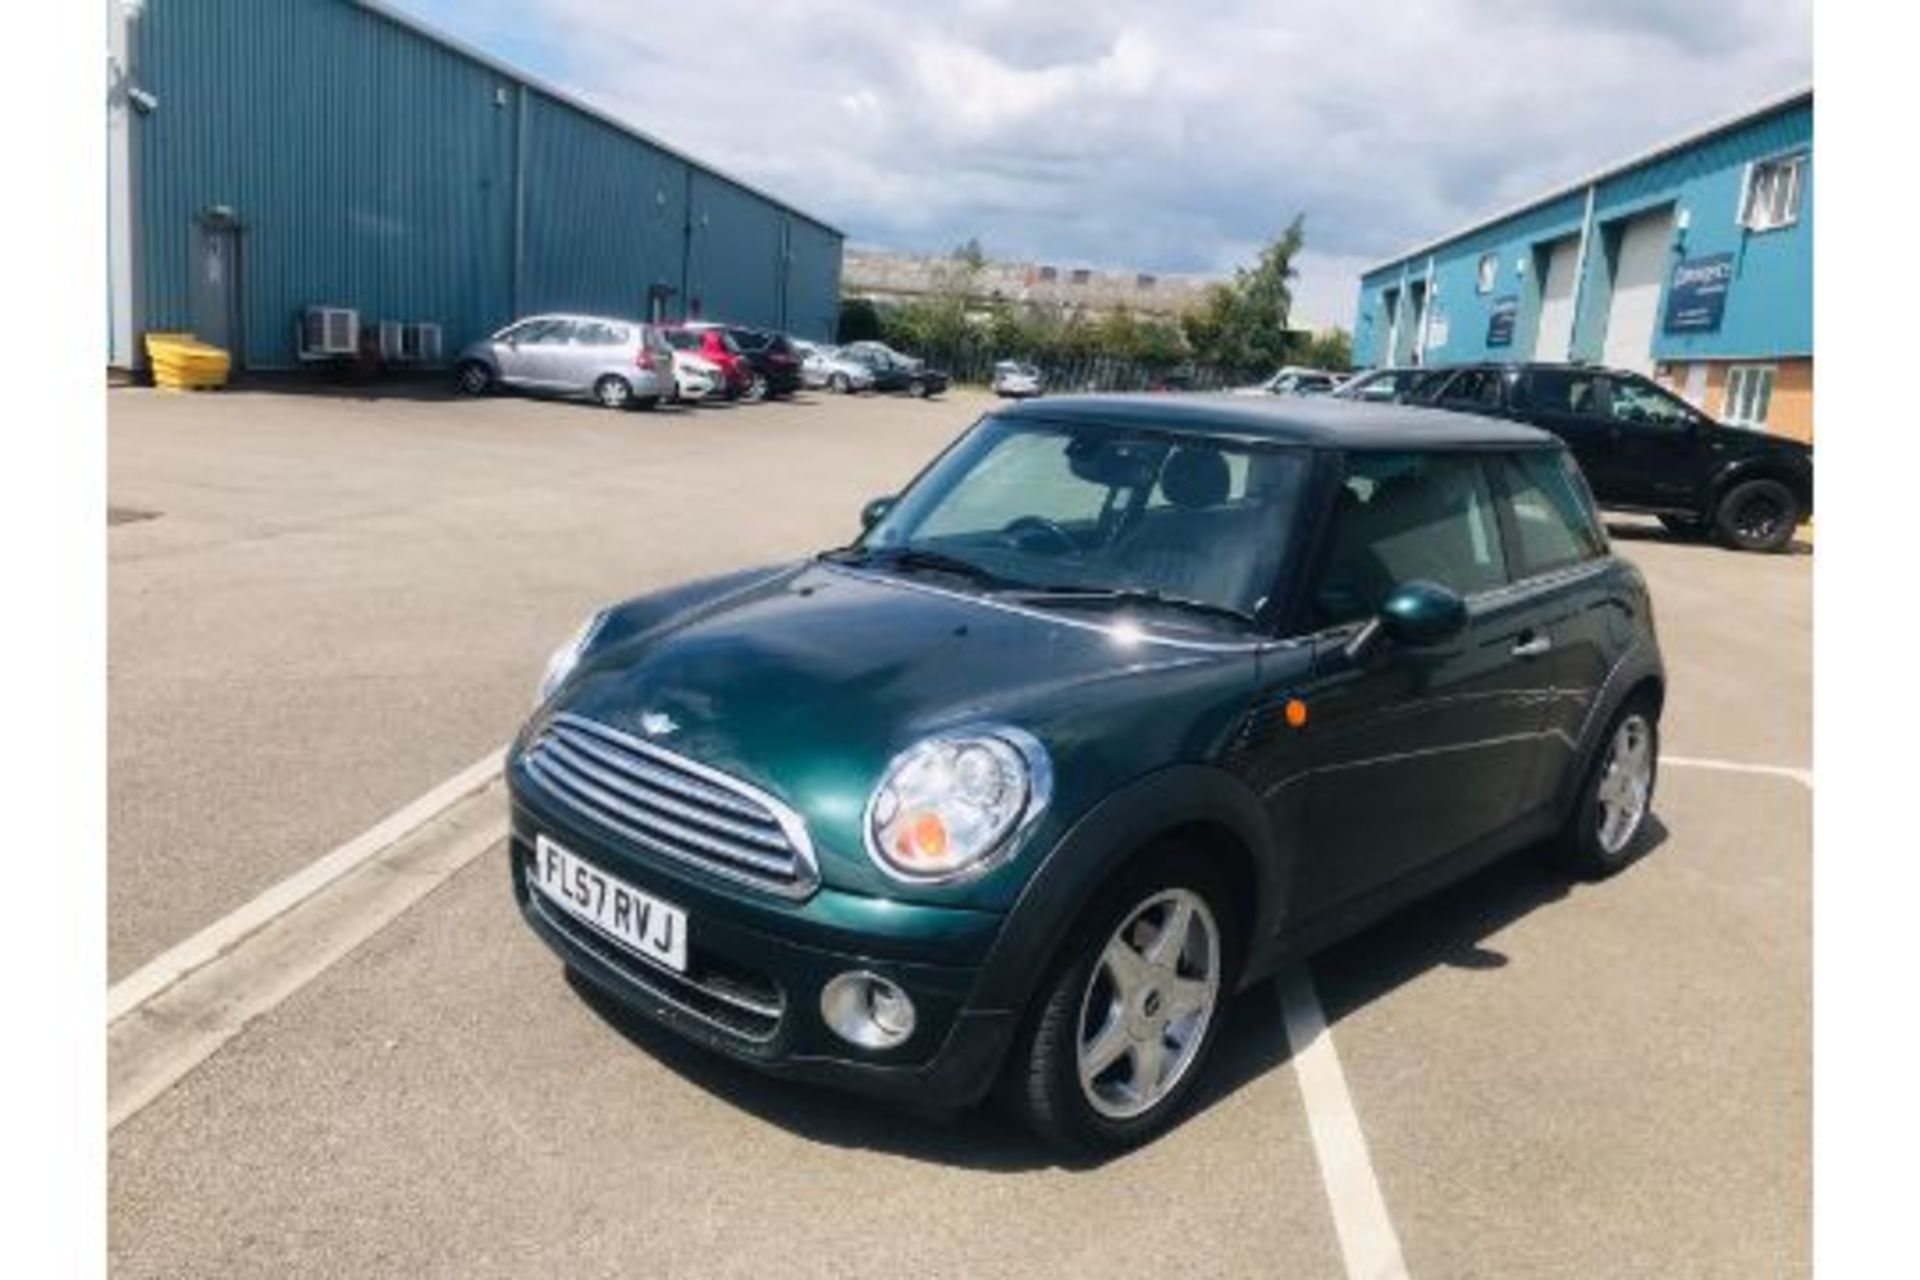 (RESERVE MET) Mini Cooper 1.6 D Hatchback - 2008 Model - Full Leather - Air Con - Heated Screen -